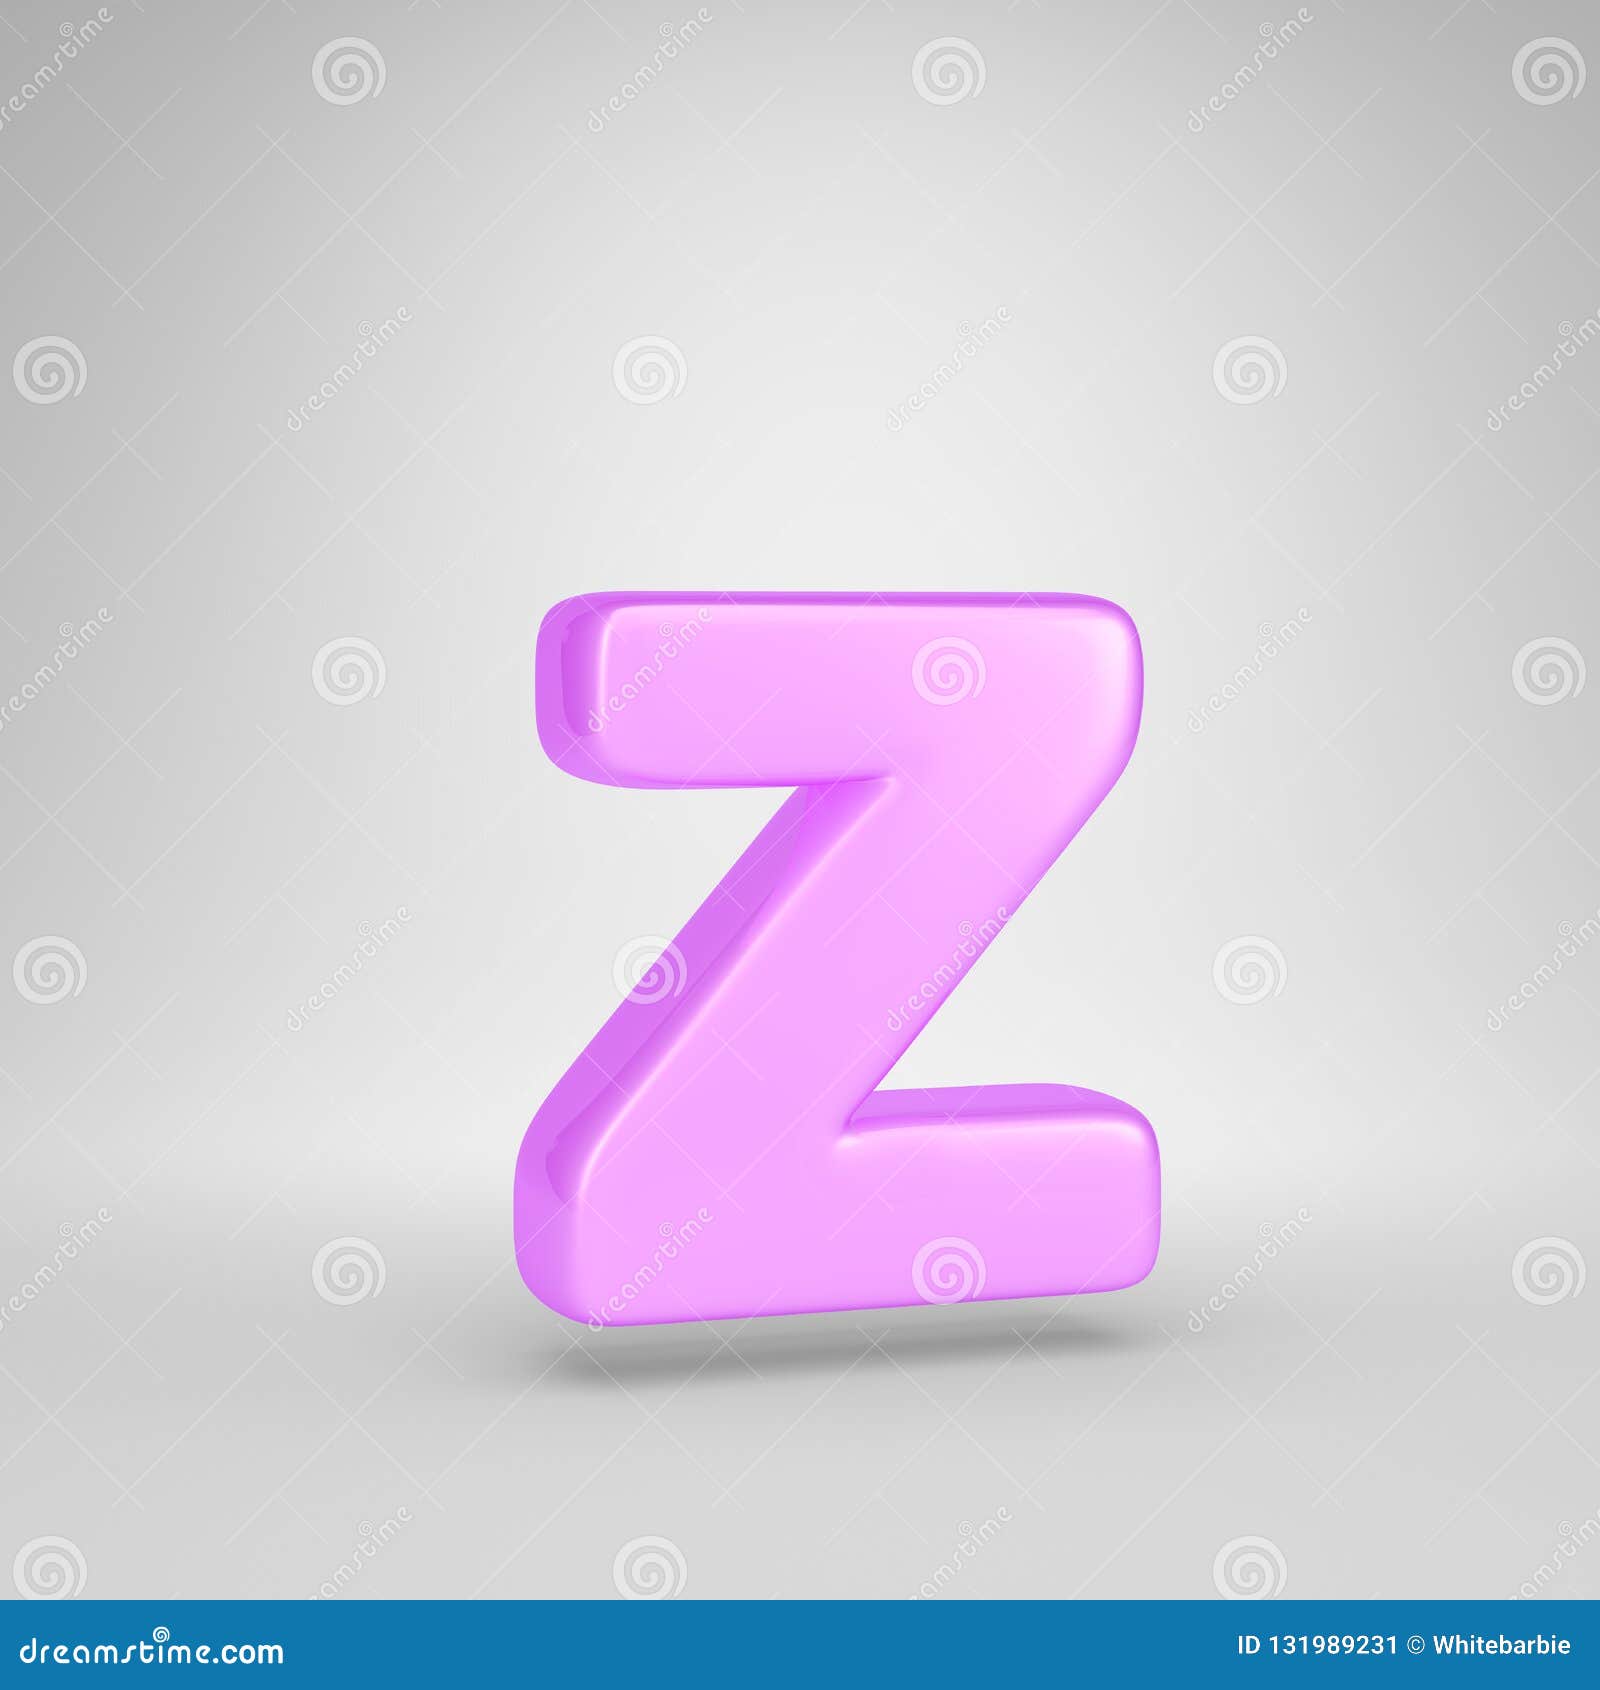 Glossy Pink Bubble Gum Letter Z Lowercase Isolated on White Background ...